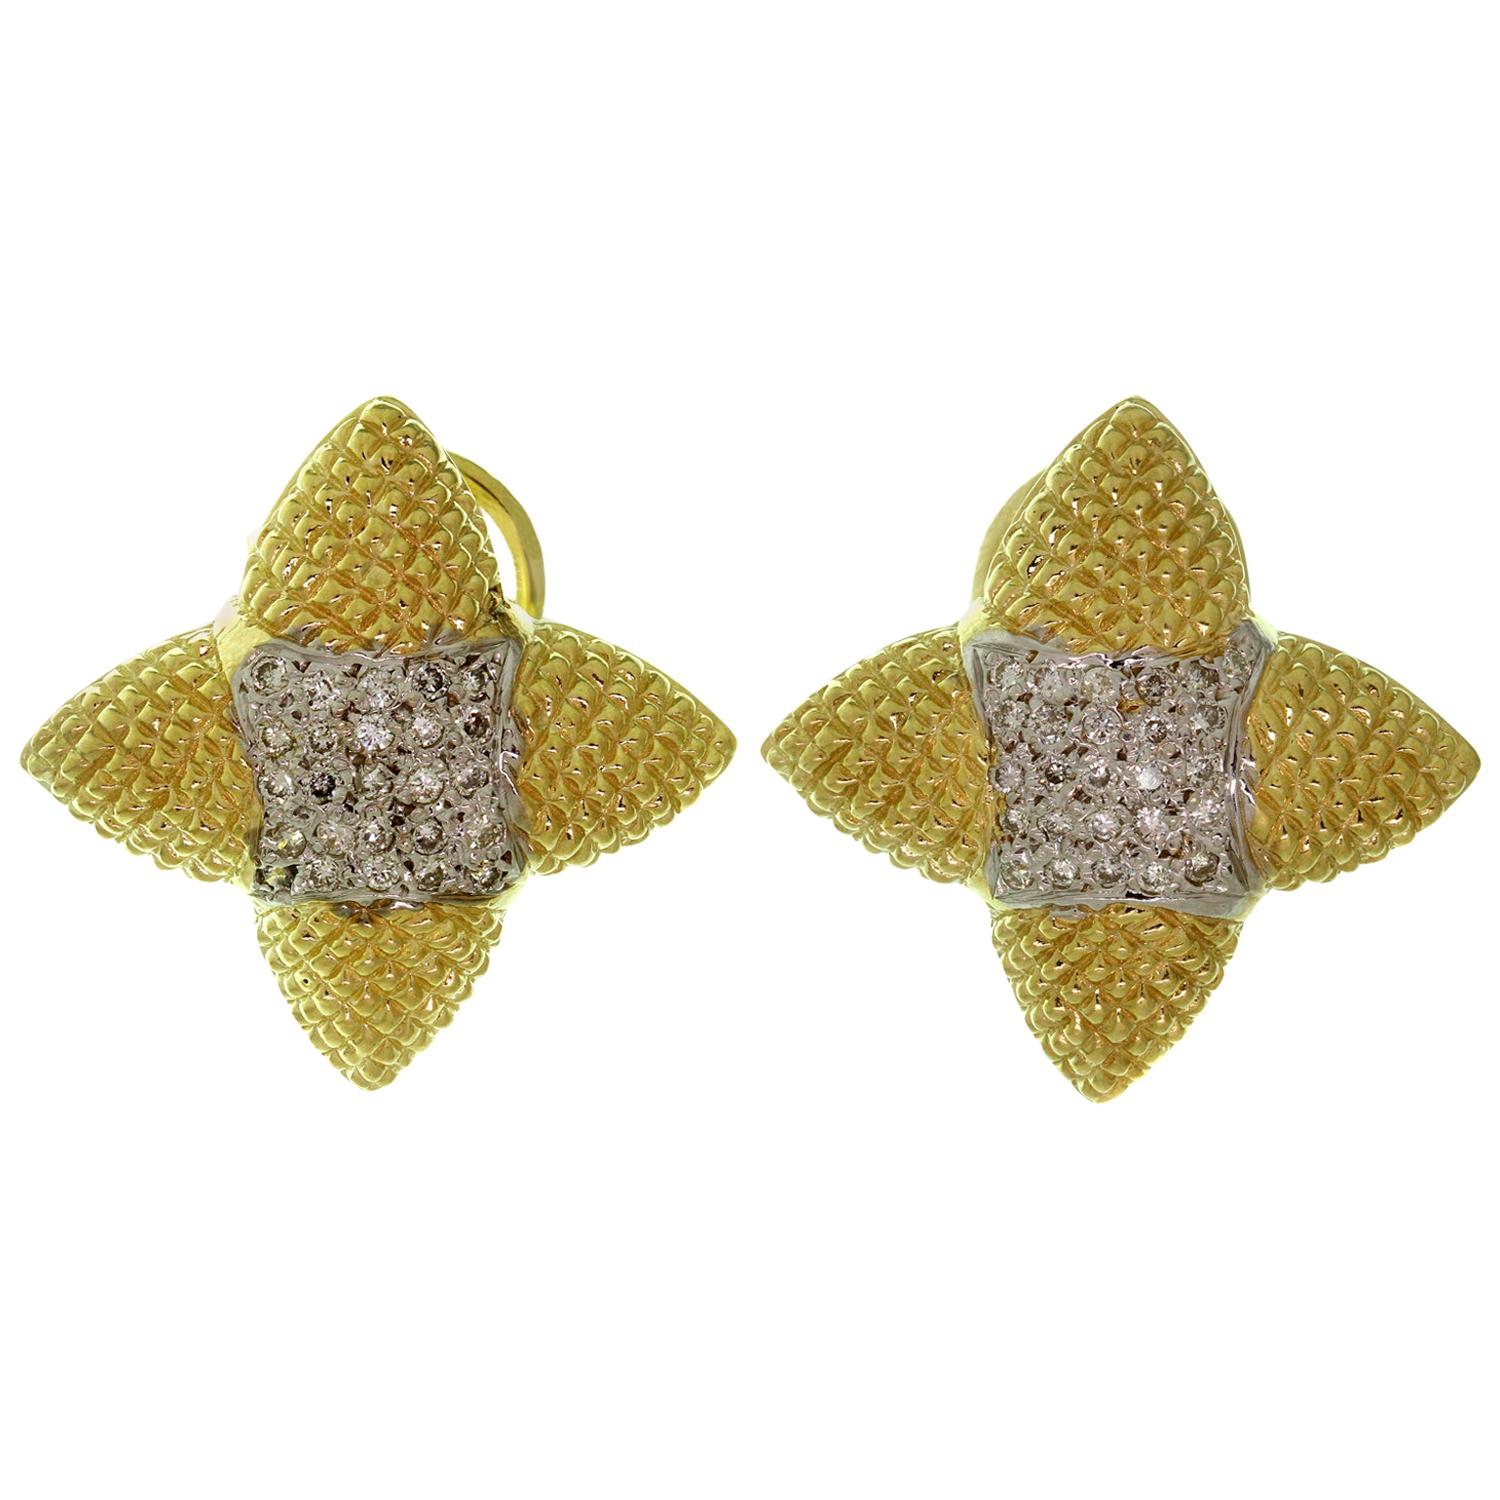 Pave Diamond Textured Yellow Gold Star Earrings